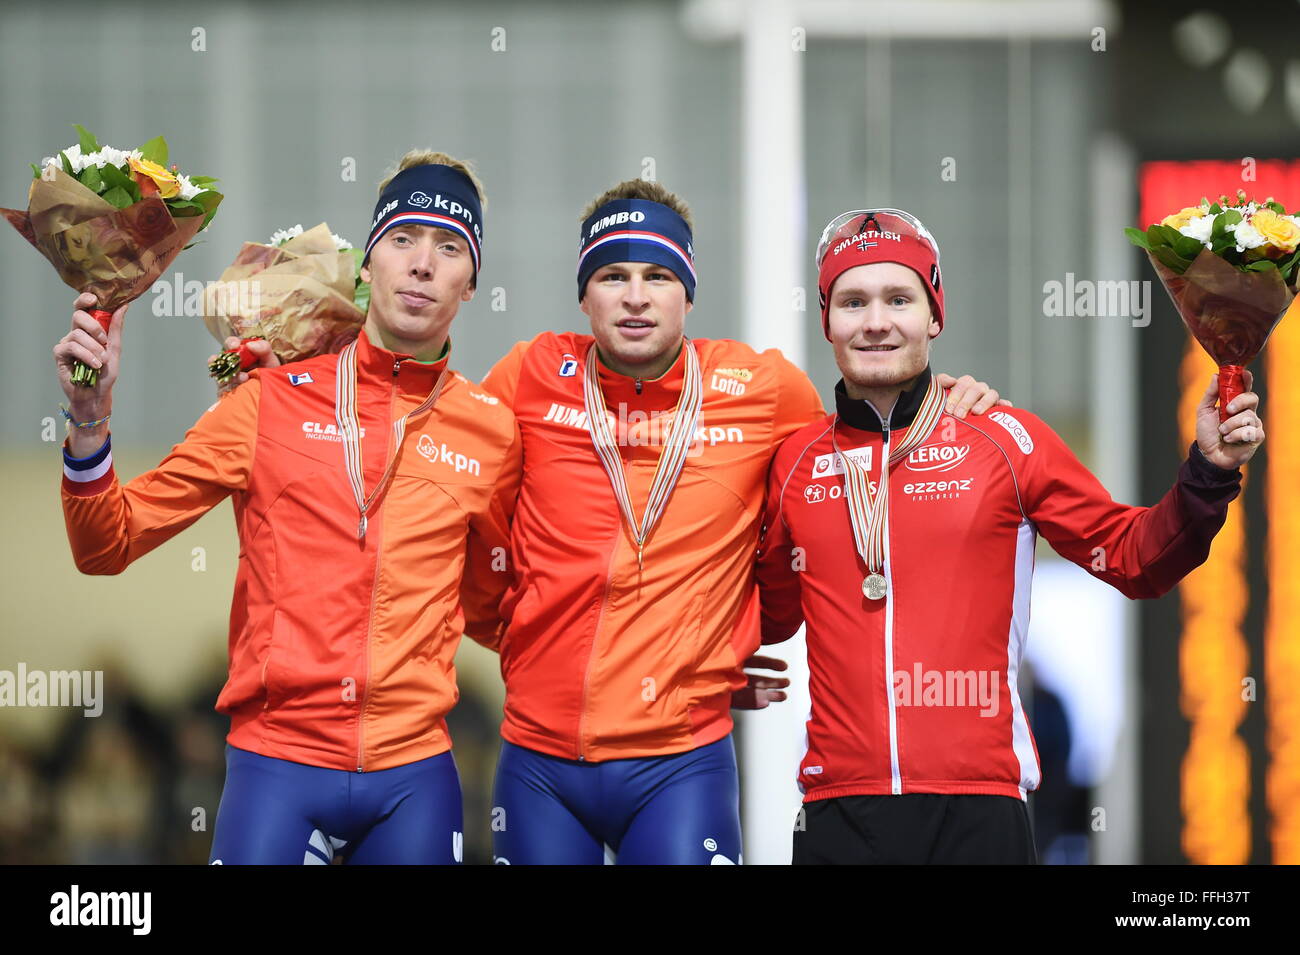 Kolomna, Russia. 13th Feb, 2016. Gold medalist Sven Kramer (C) and silver medalist Jorrit Bergsma (L) of the Netherlands, bronze medalist Sverre Lunde Pedersen of Norway pose during the awarding ceremony of the men's 5000m event at ISU world single distances speed skating championships in Kolomna, Russia, on Feb. 13, 2016. Credit:  Evgeny Sinitsyn/Xinhua/Alamy Live News Stock Photo